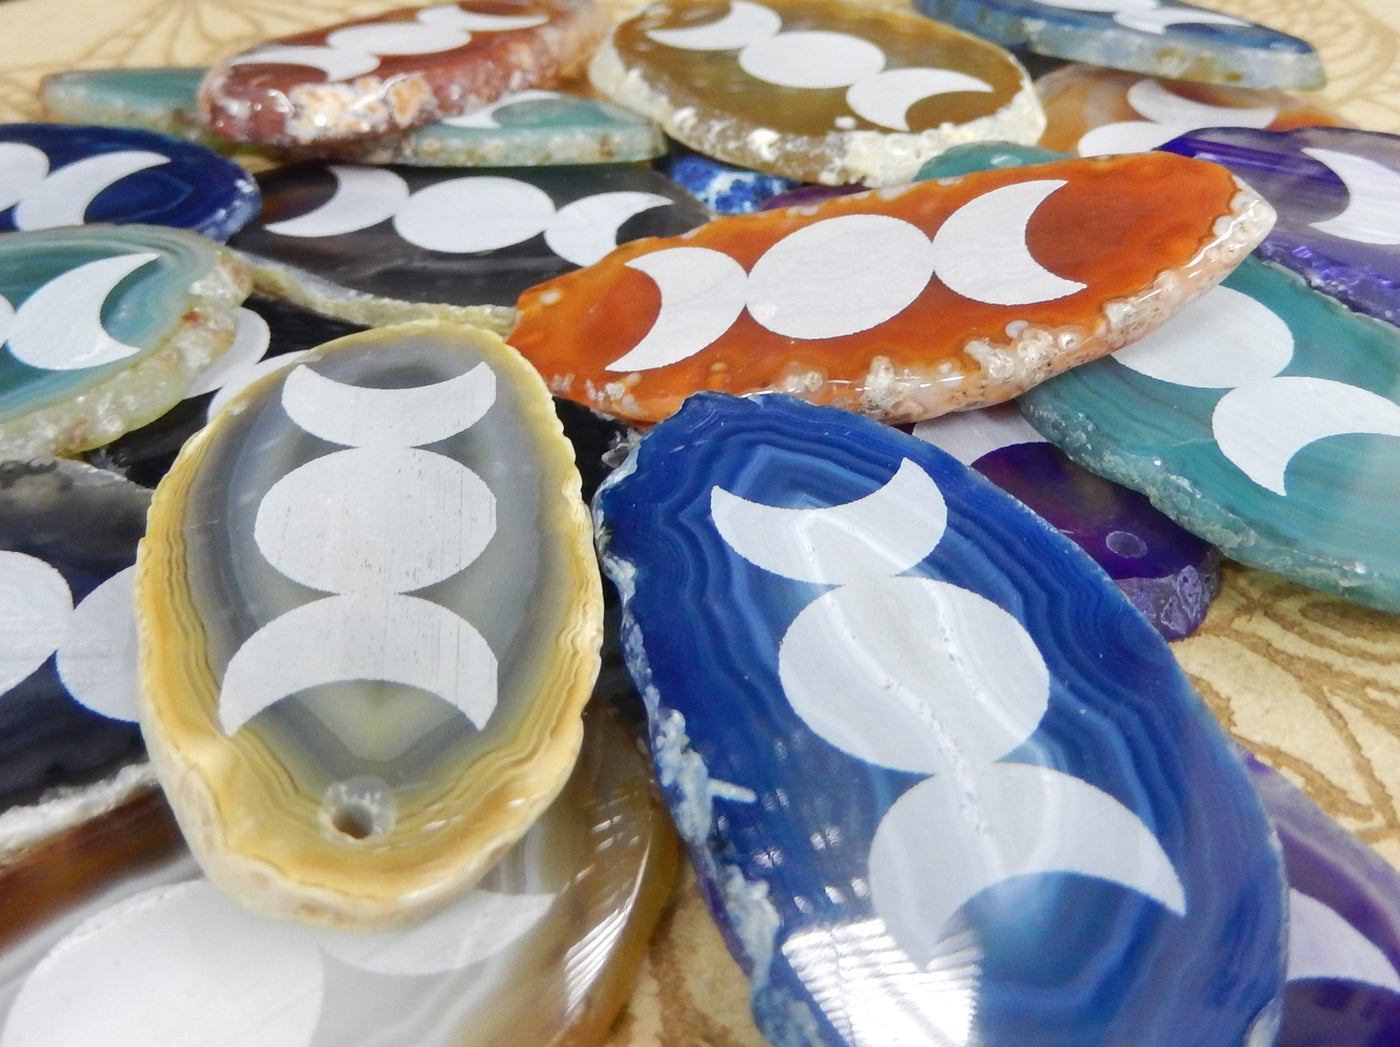 all of our agate slices are being displayed on a wooden surface.